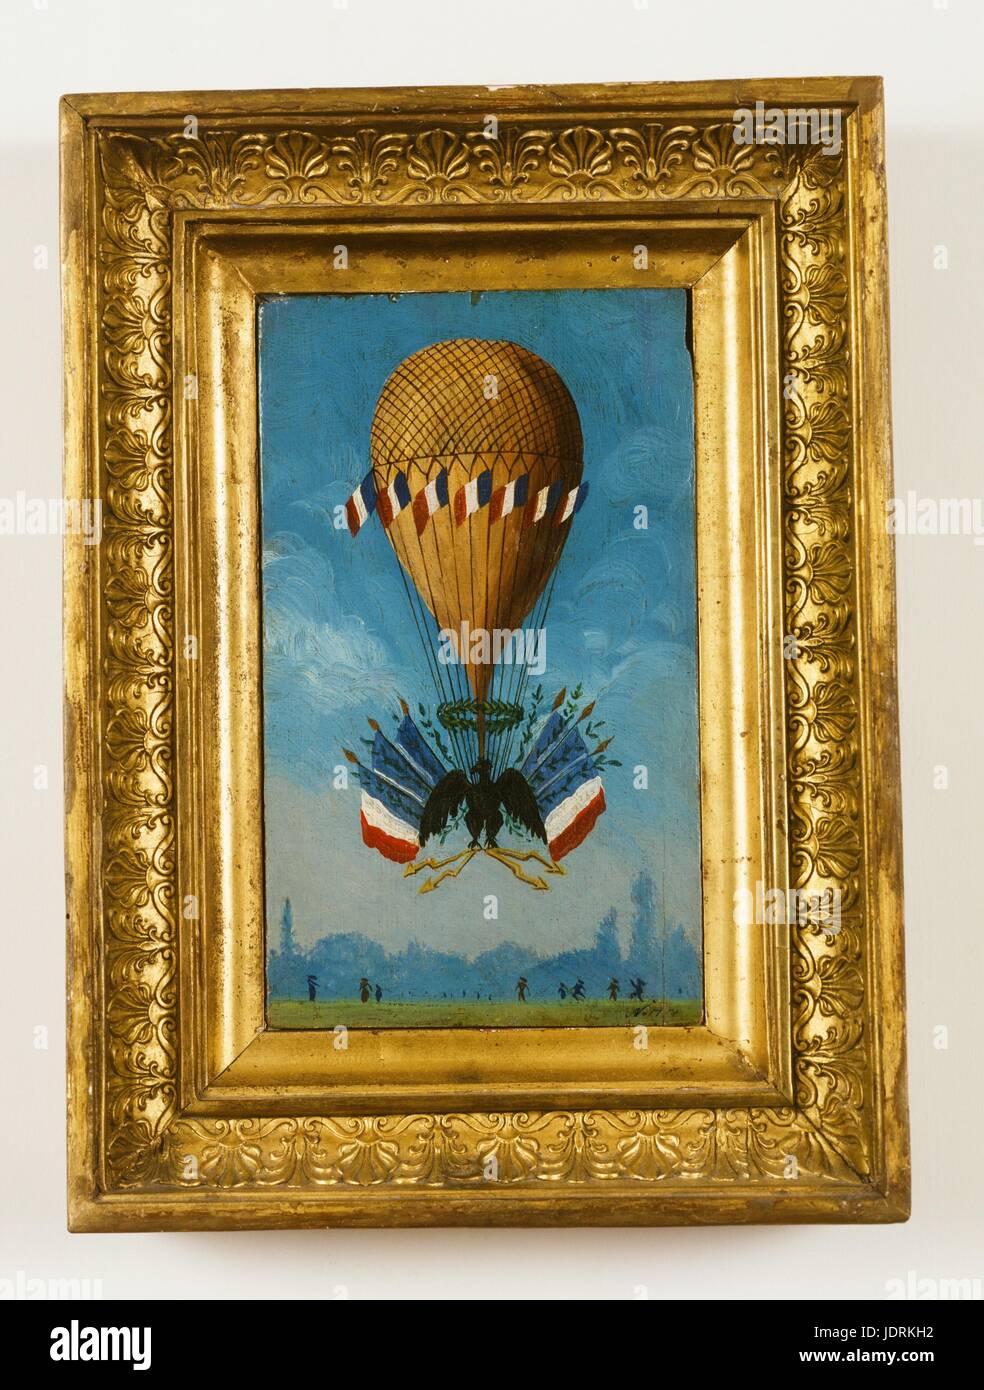 Coronation balloon - Paris 2nd December 1804 (25 Frimaire year XIII according to Republican calendar)   Oil painting on framed panel (34 x 25 cm)  Muller-Quênot Collection For his coronation Napoleon I asked Garnerin to organise an aerostatic experiment for the celebrations in Paris.   The evening ended with a firework display at eleven o'clock in the evening followed by the ascent of a large balloon decorated with flags and surrounded by four other aerostats. An eagle and an imperial crown were illuminated by three thousand coloured lights placed around the gondola. The painting consists of a Stock Photo